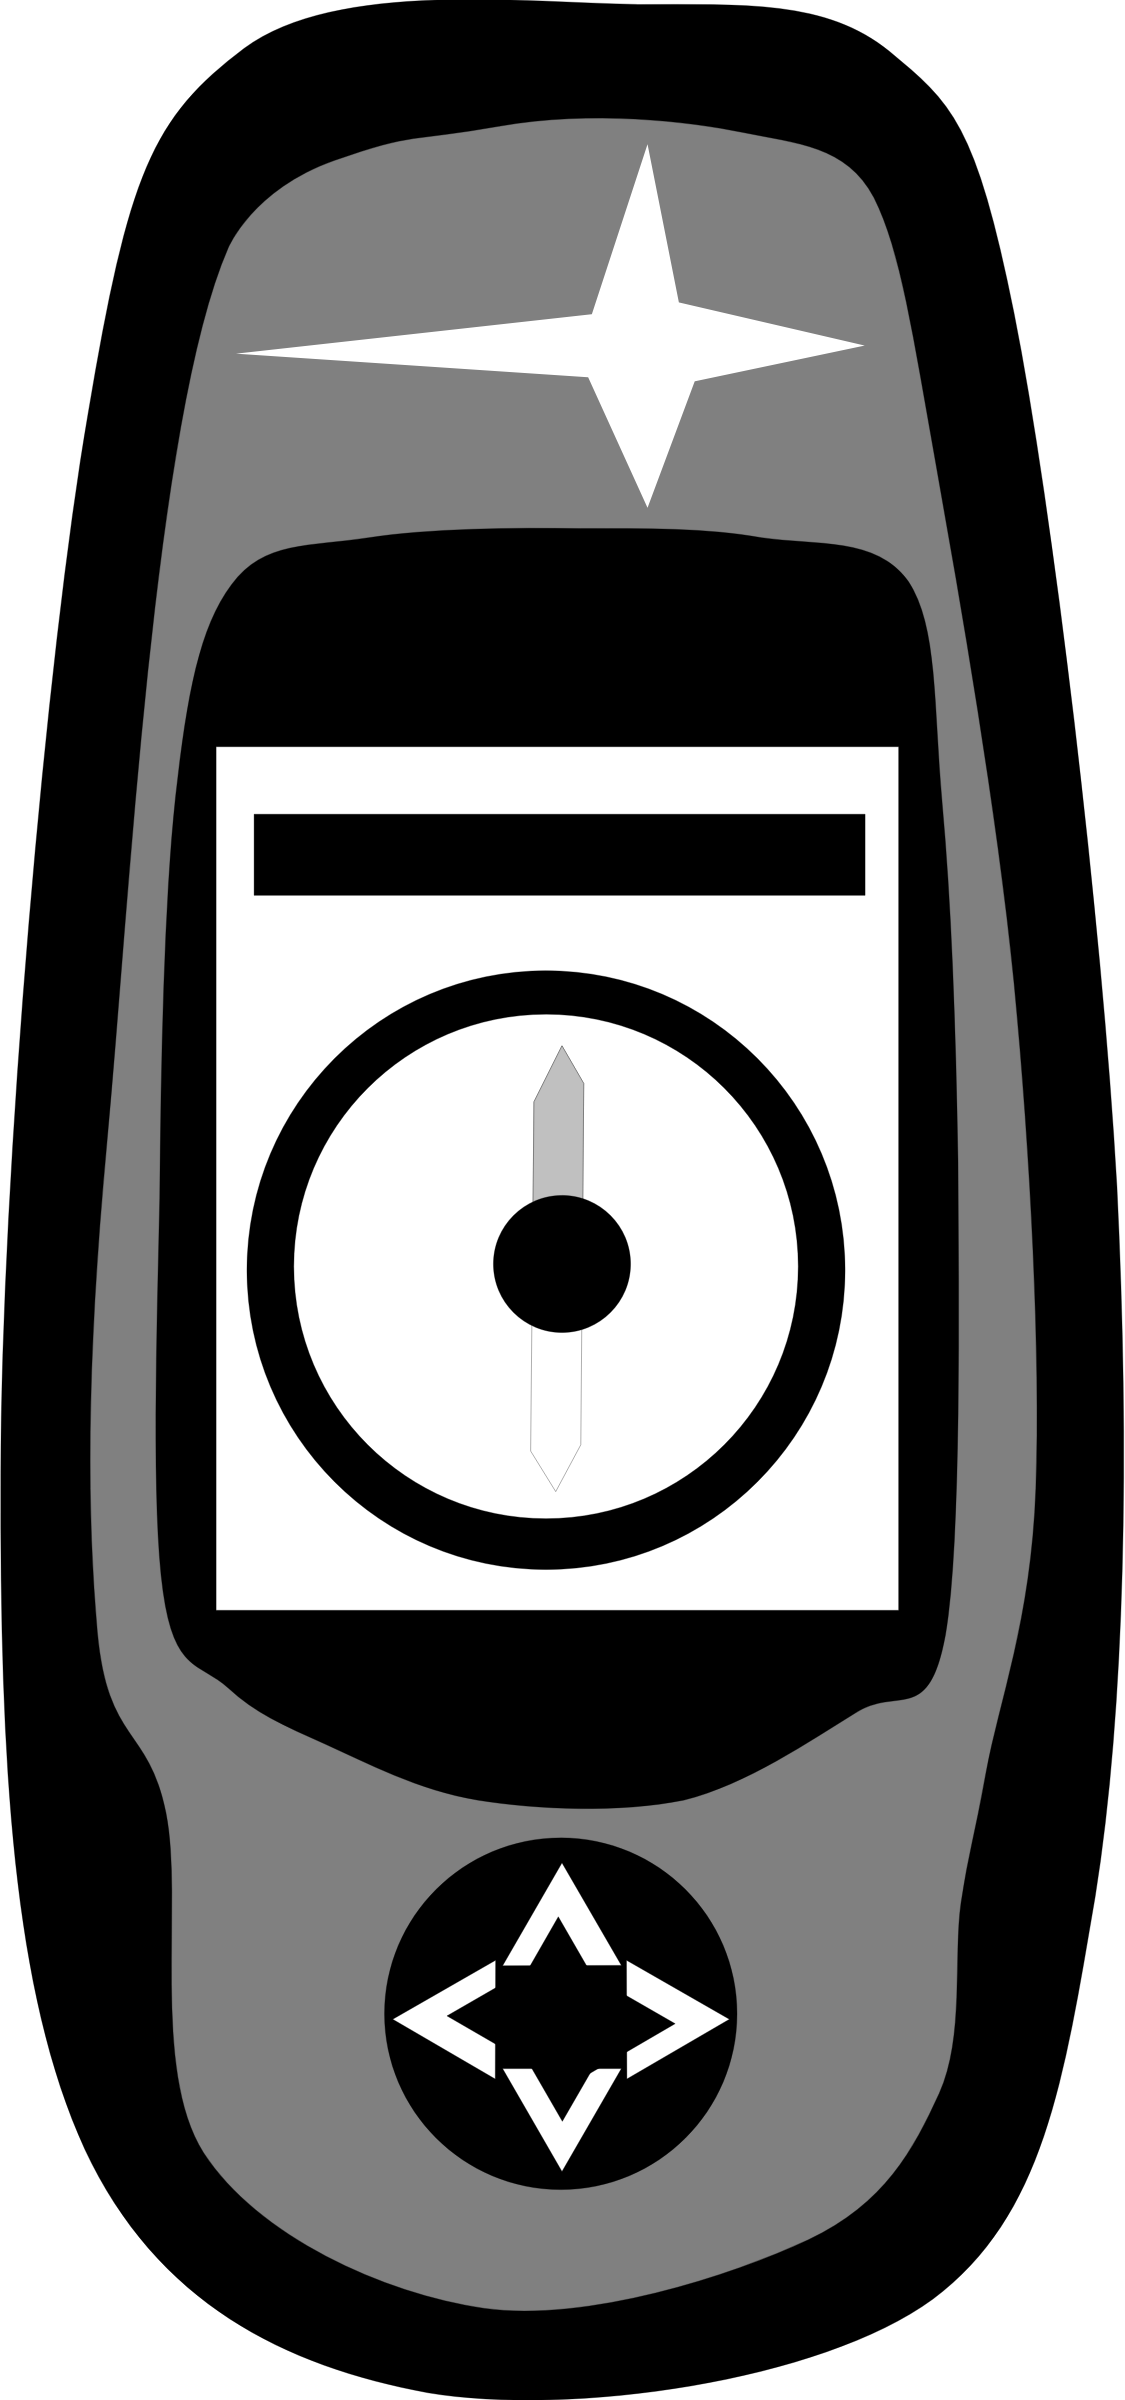 A Black And White Device With A Black Circle And A Black Circle